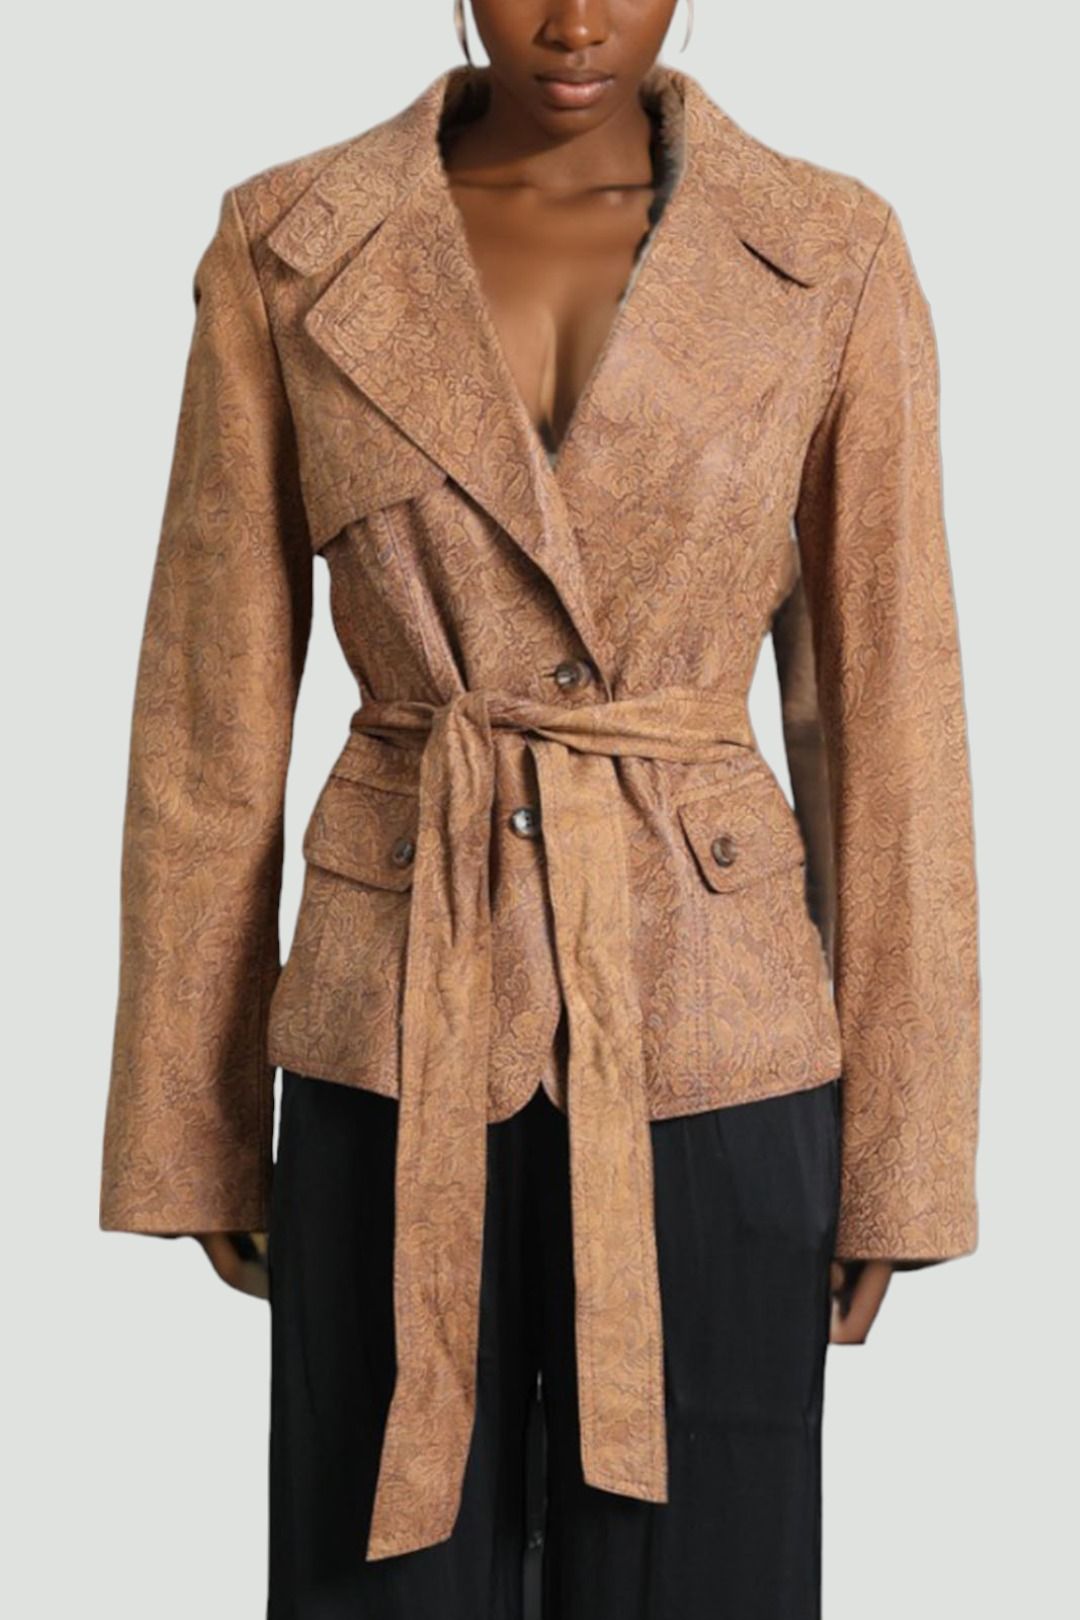 Anne Klein Tan Single Breasted Leather Jacket